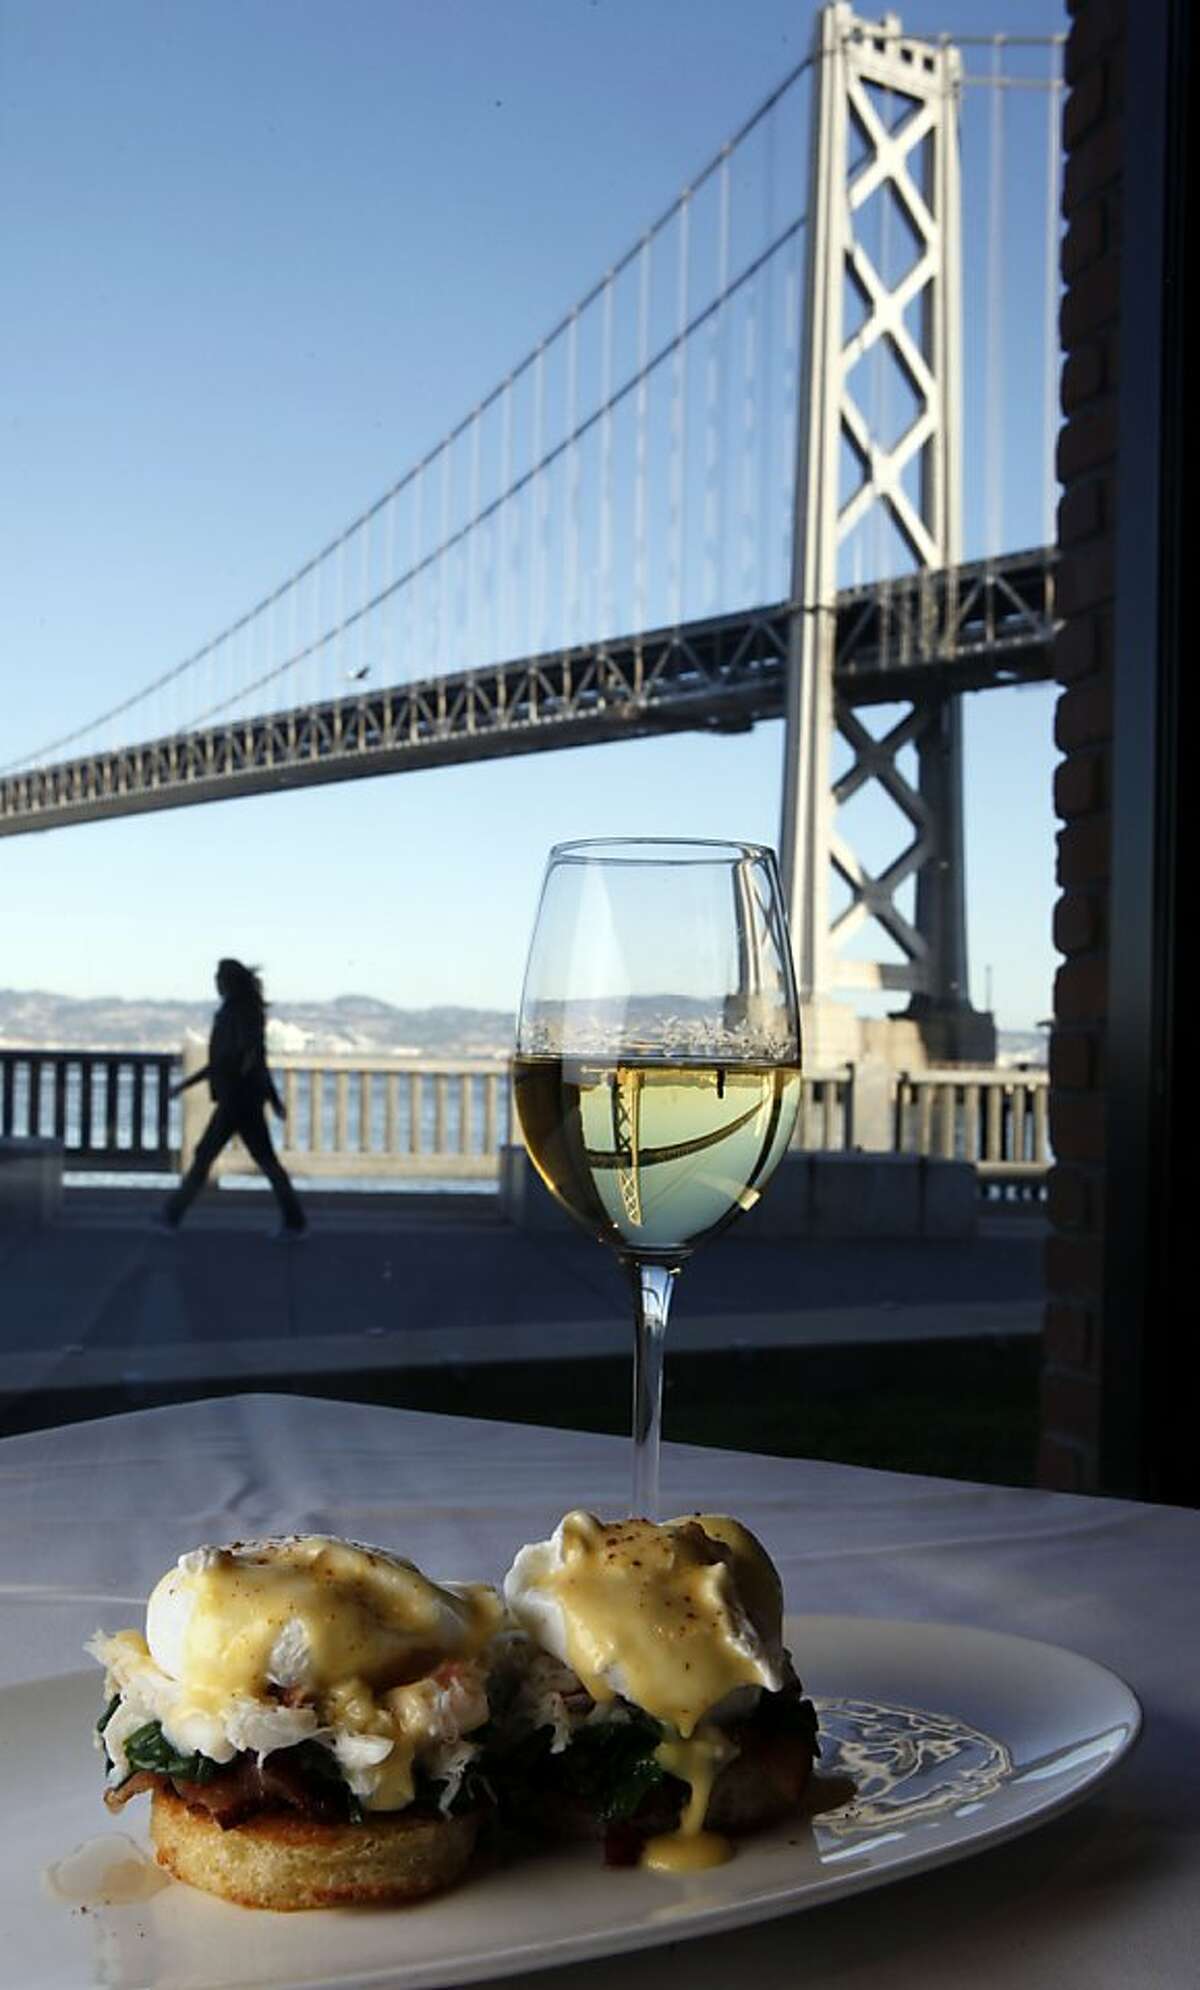 Six of a kind: Saturday lunch spots in S.F.